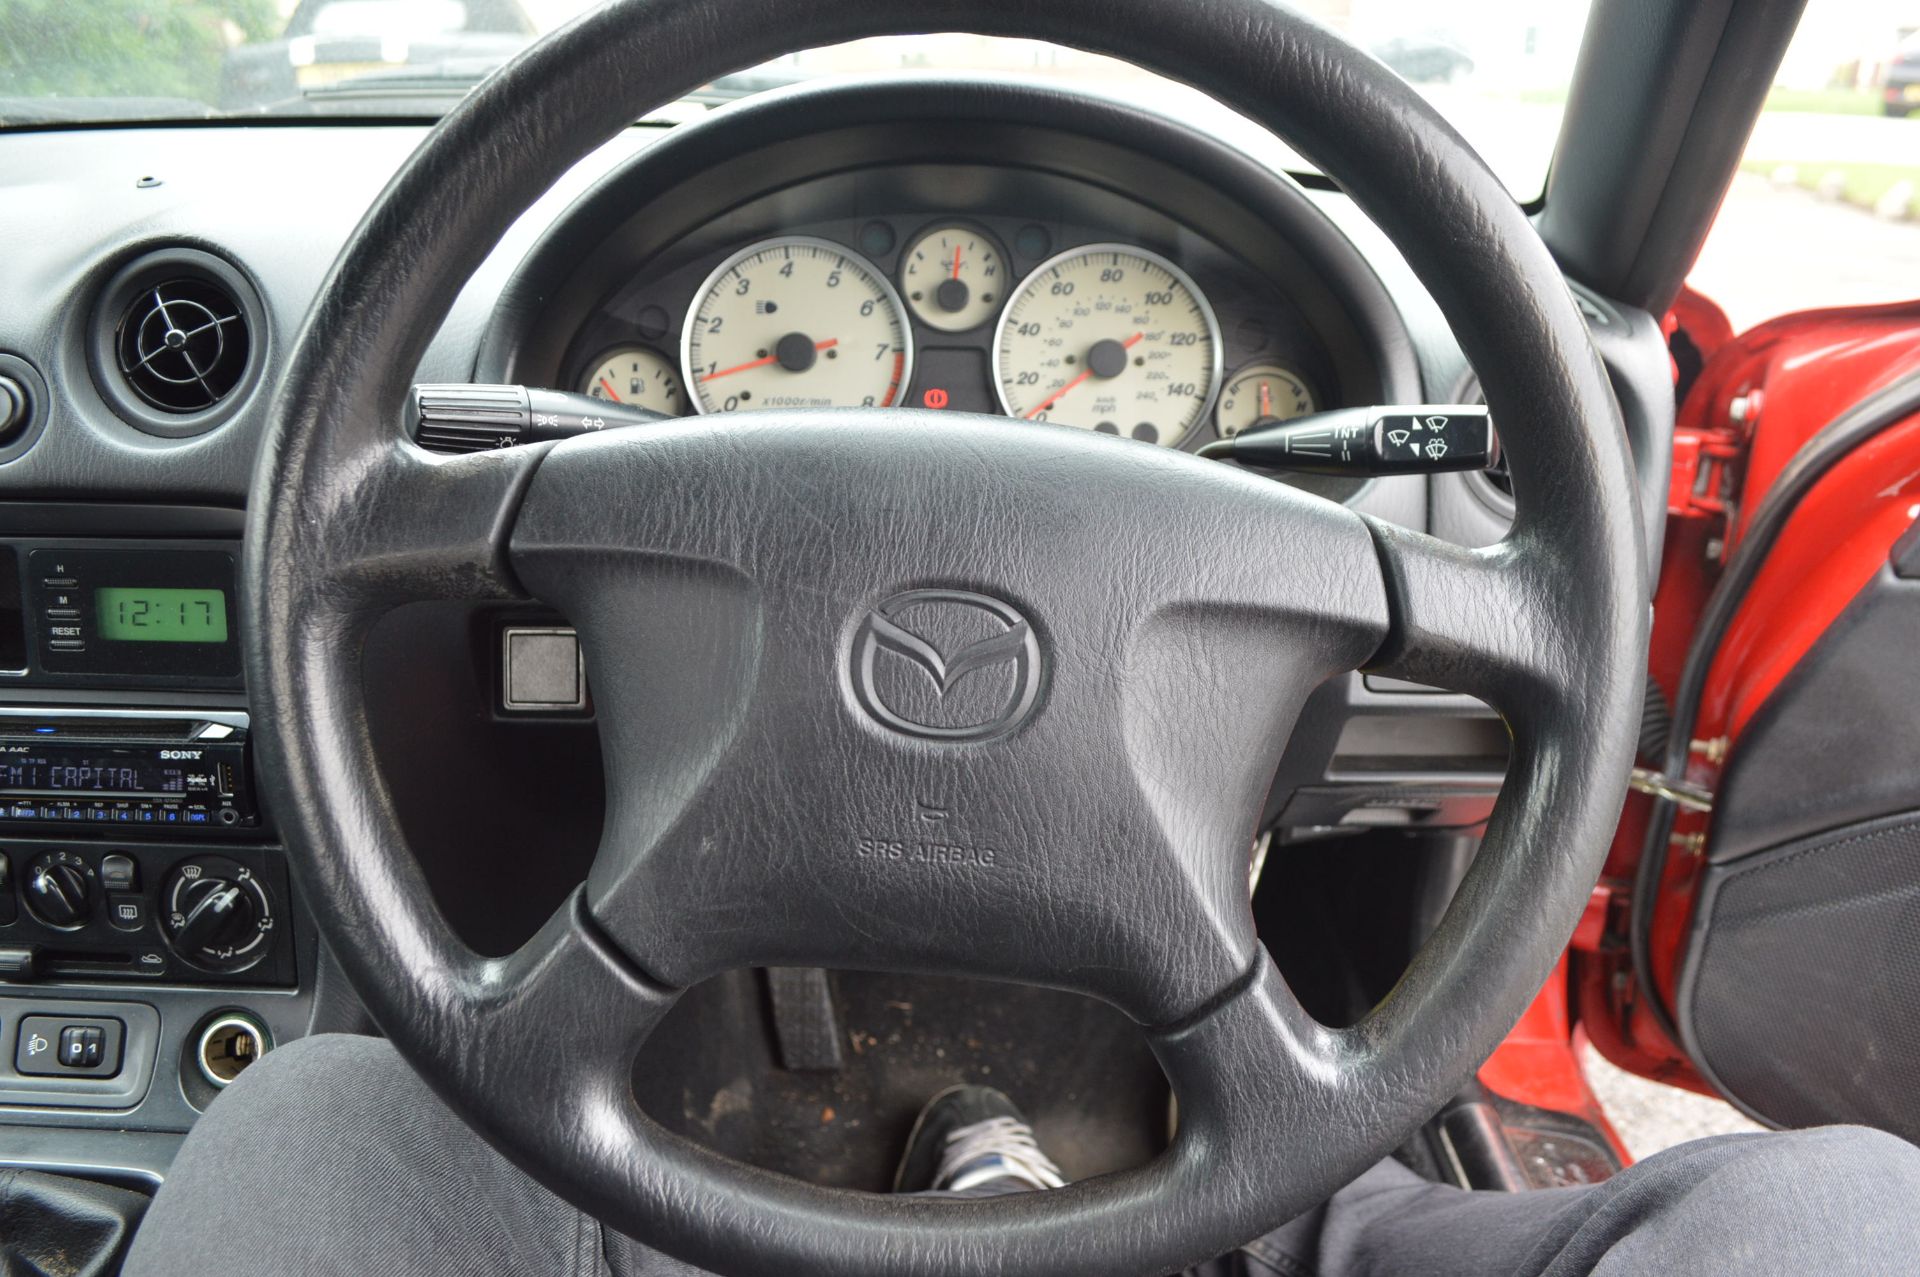 2001/Y REG MAZDA MX-5 1.81 CONVERTIBLE, UPRATED SUSPENSION, BRAKES, INDUCTION, - Image 14 of 17